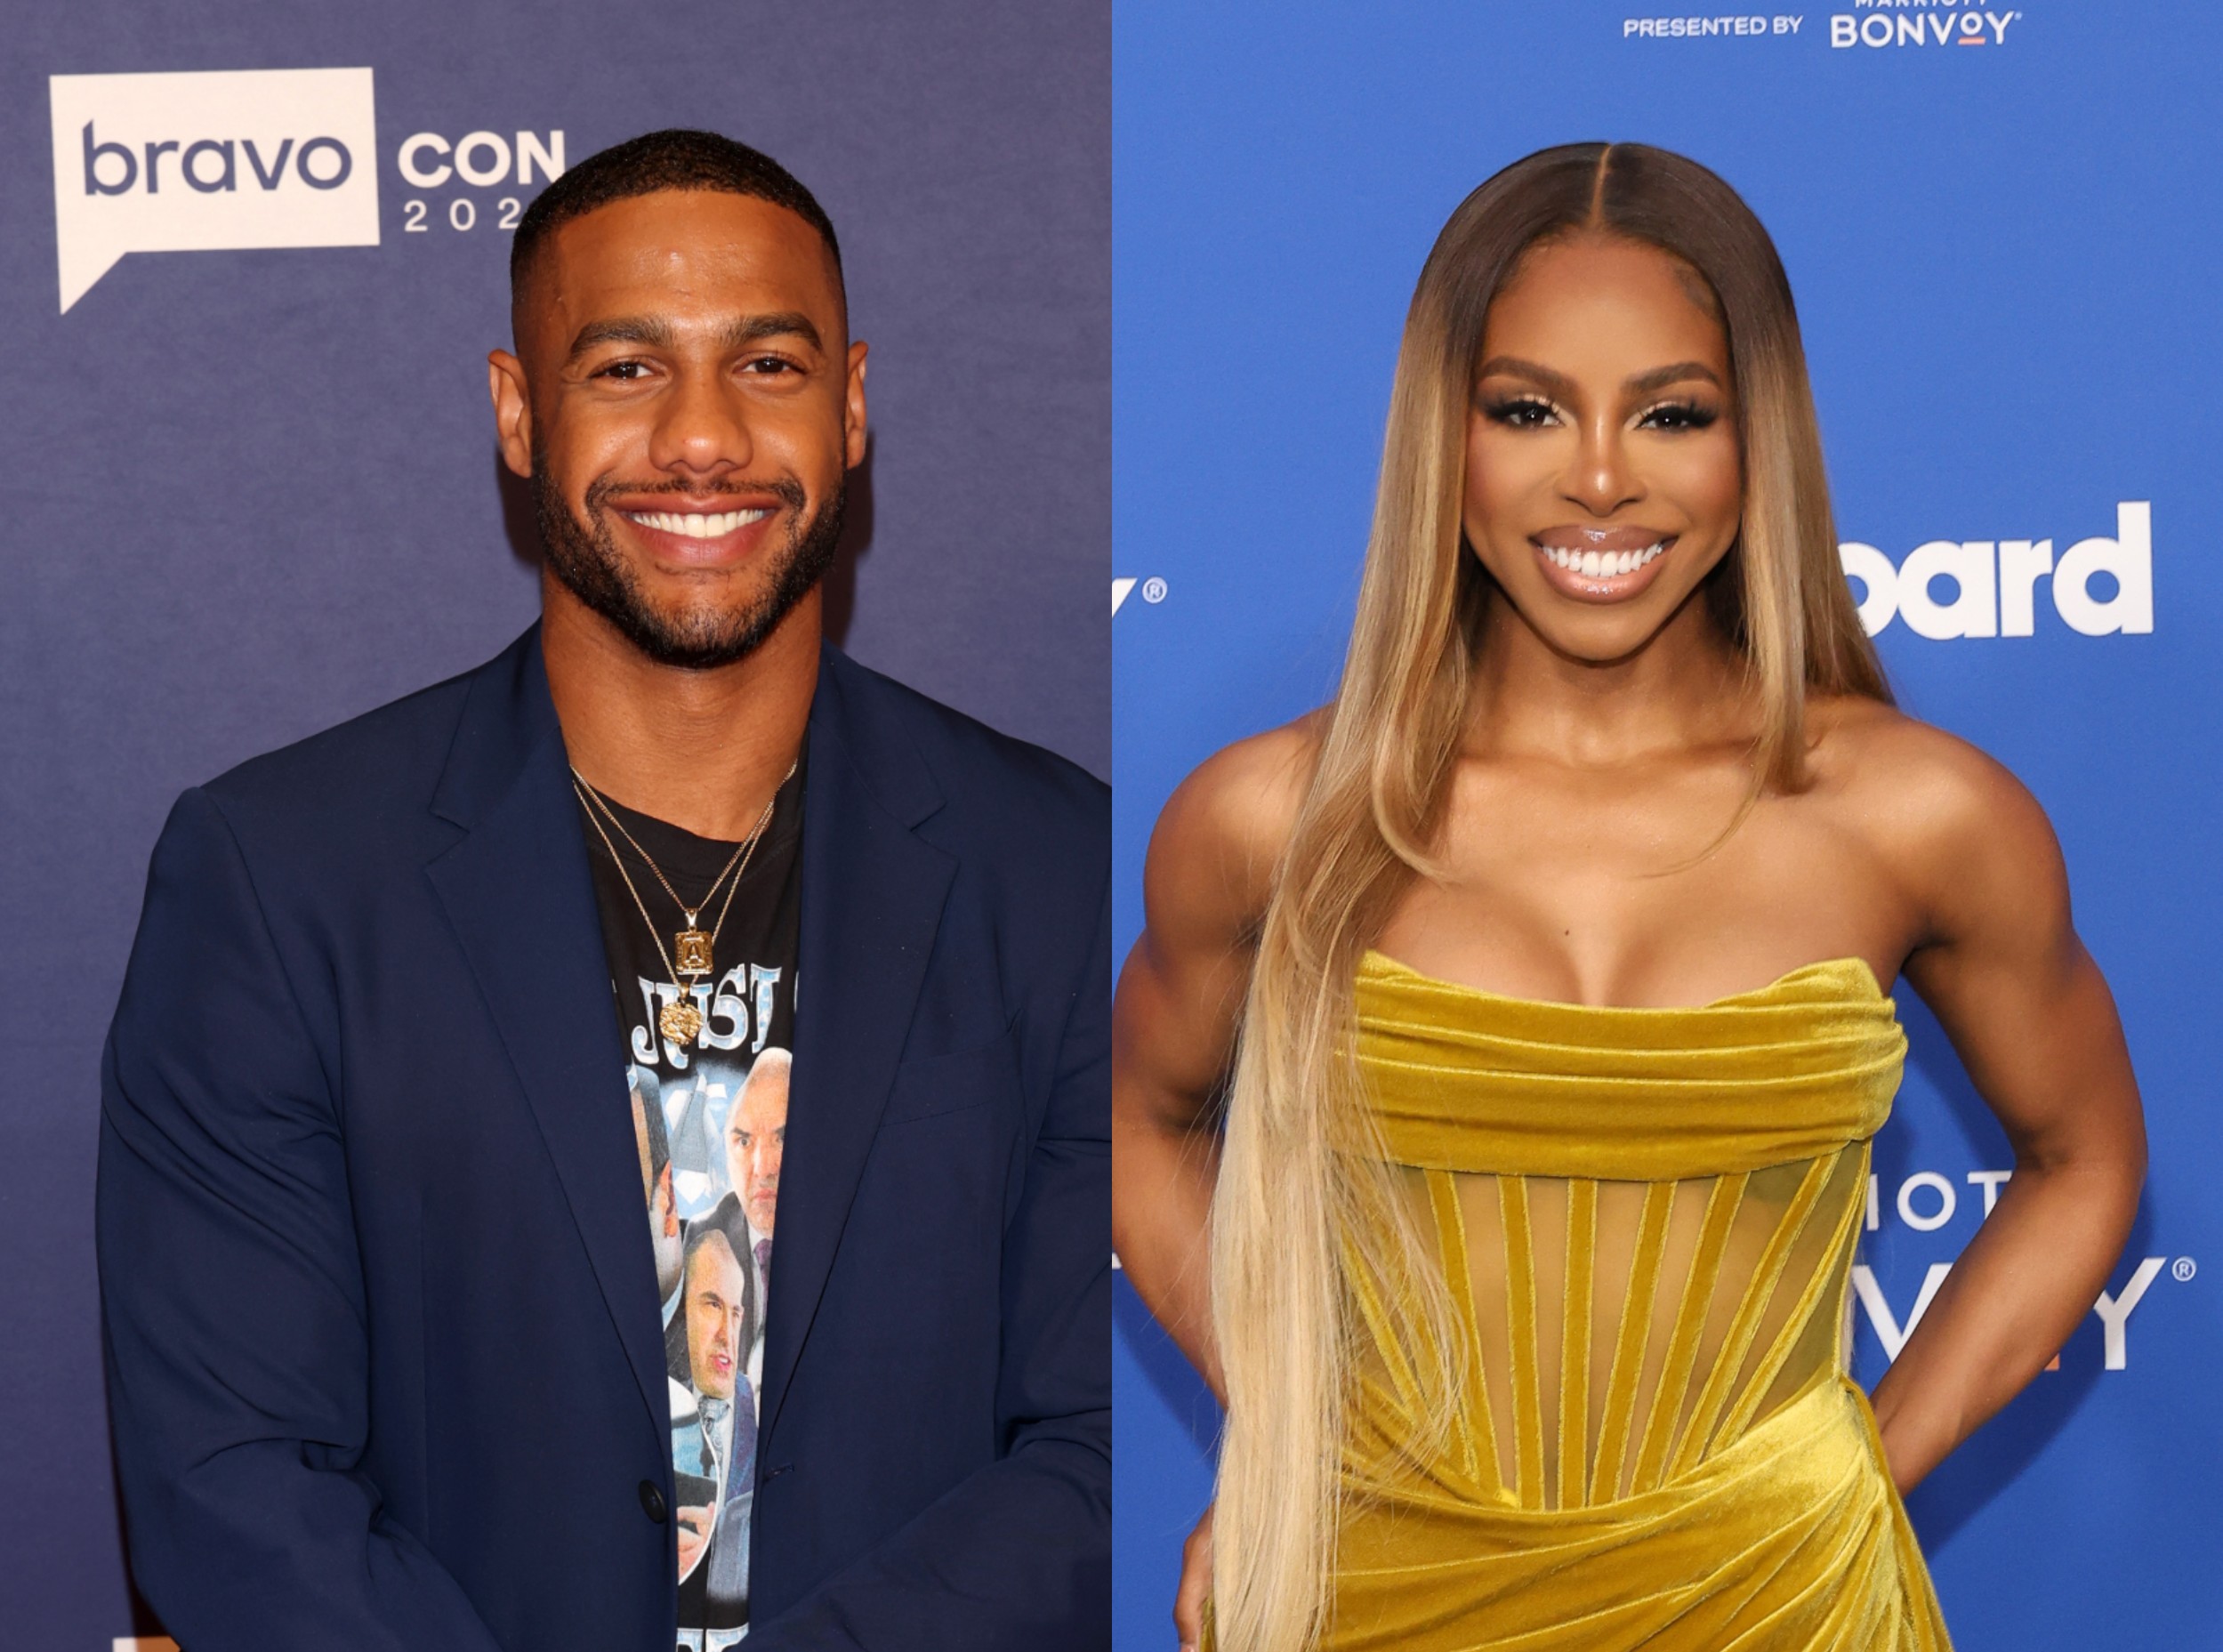 Summer HouseMV: Amir Lancaster Peeped Candiace Dillard’s Social Media Shade And Comes To His Girlfriend’s Defense